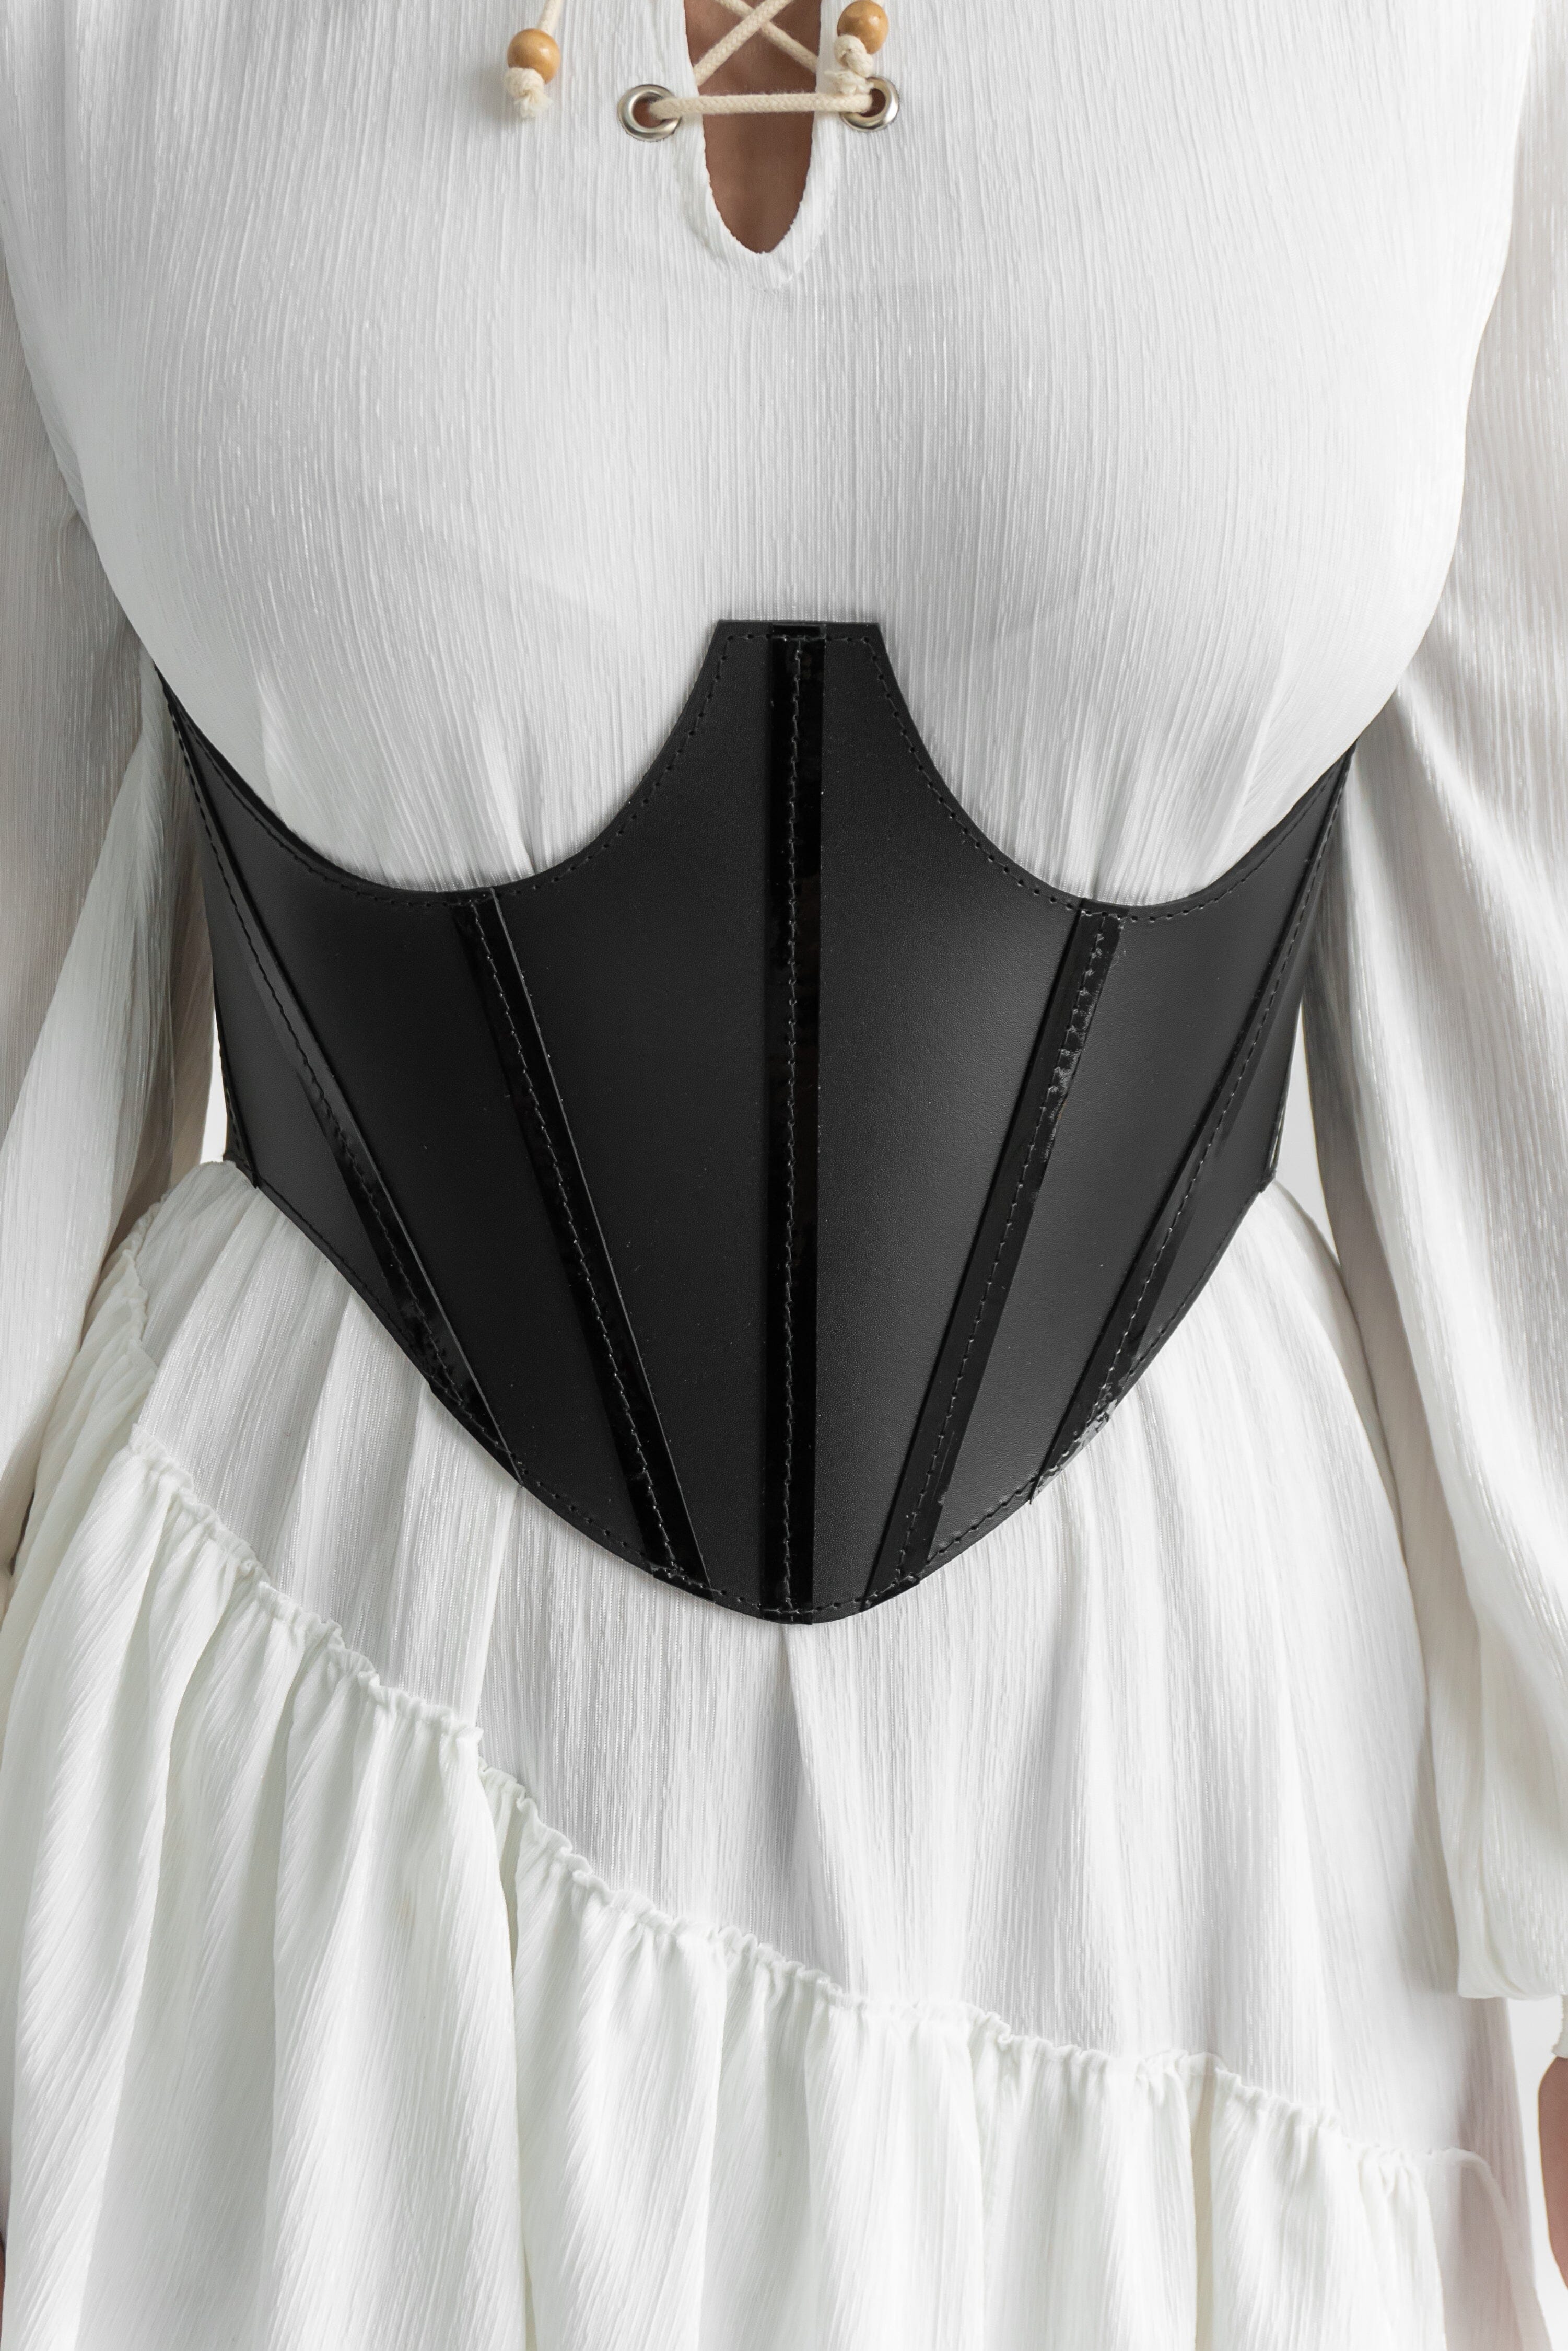 Dominica Corset with Patent (2)